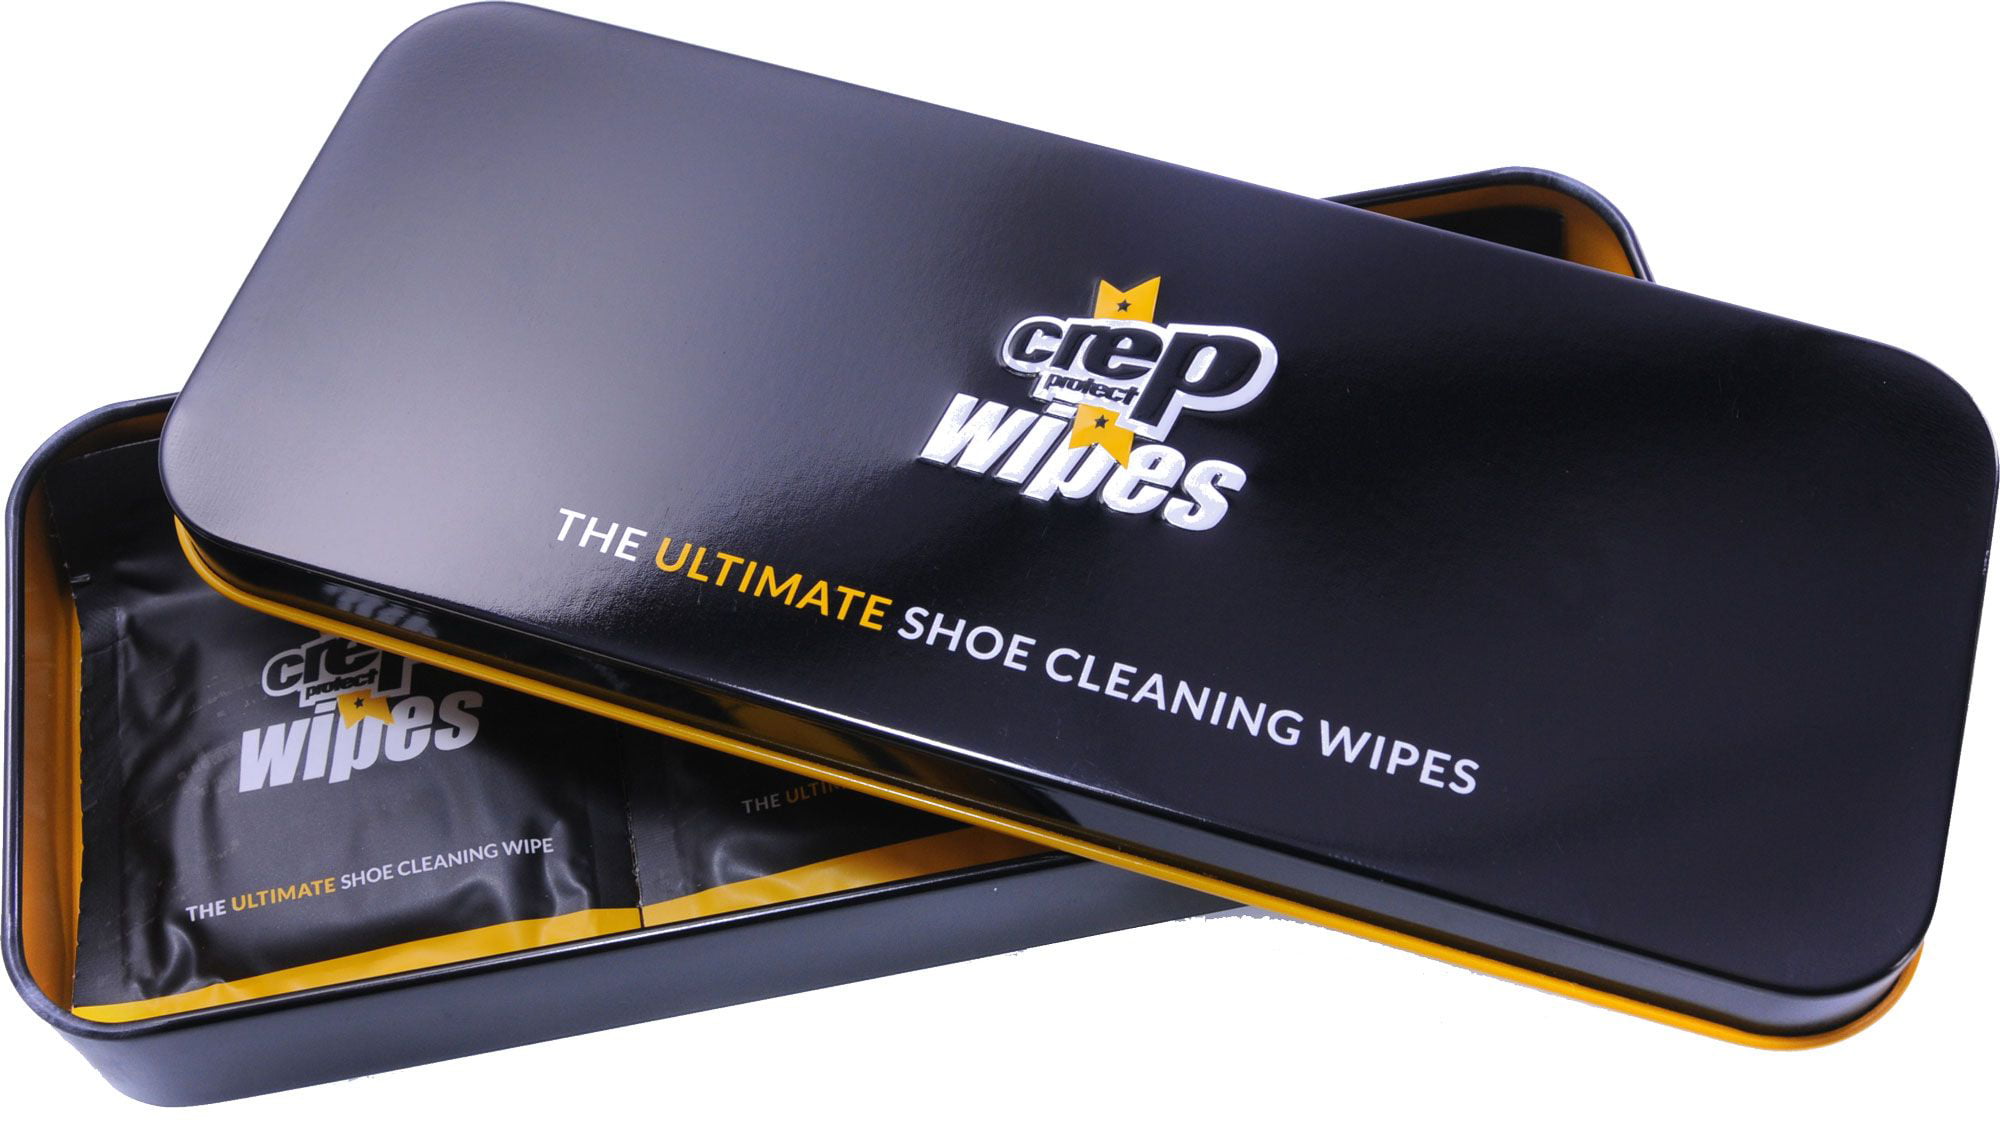 Crep Protect Shoe Cleaning Wipes - Walmart.com